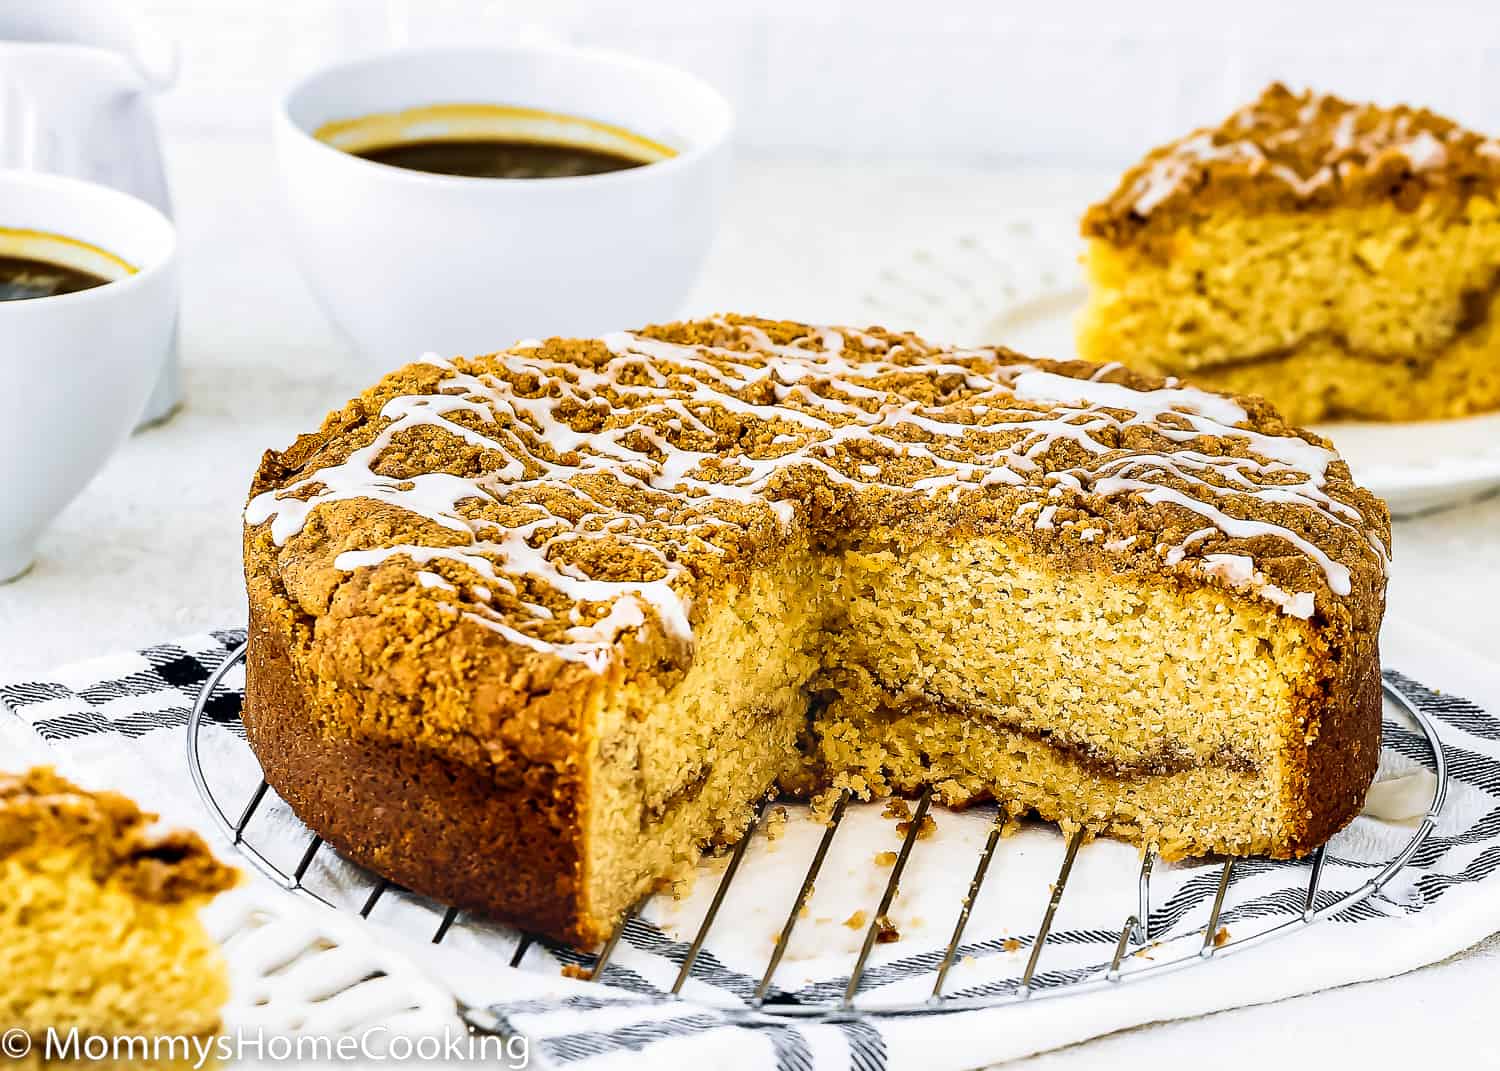 A sliced Eggless Coffee Cake with streusel on top over a cooling rack with two cup of coffee on the background.